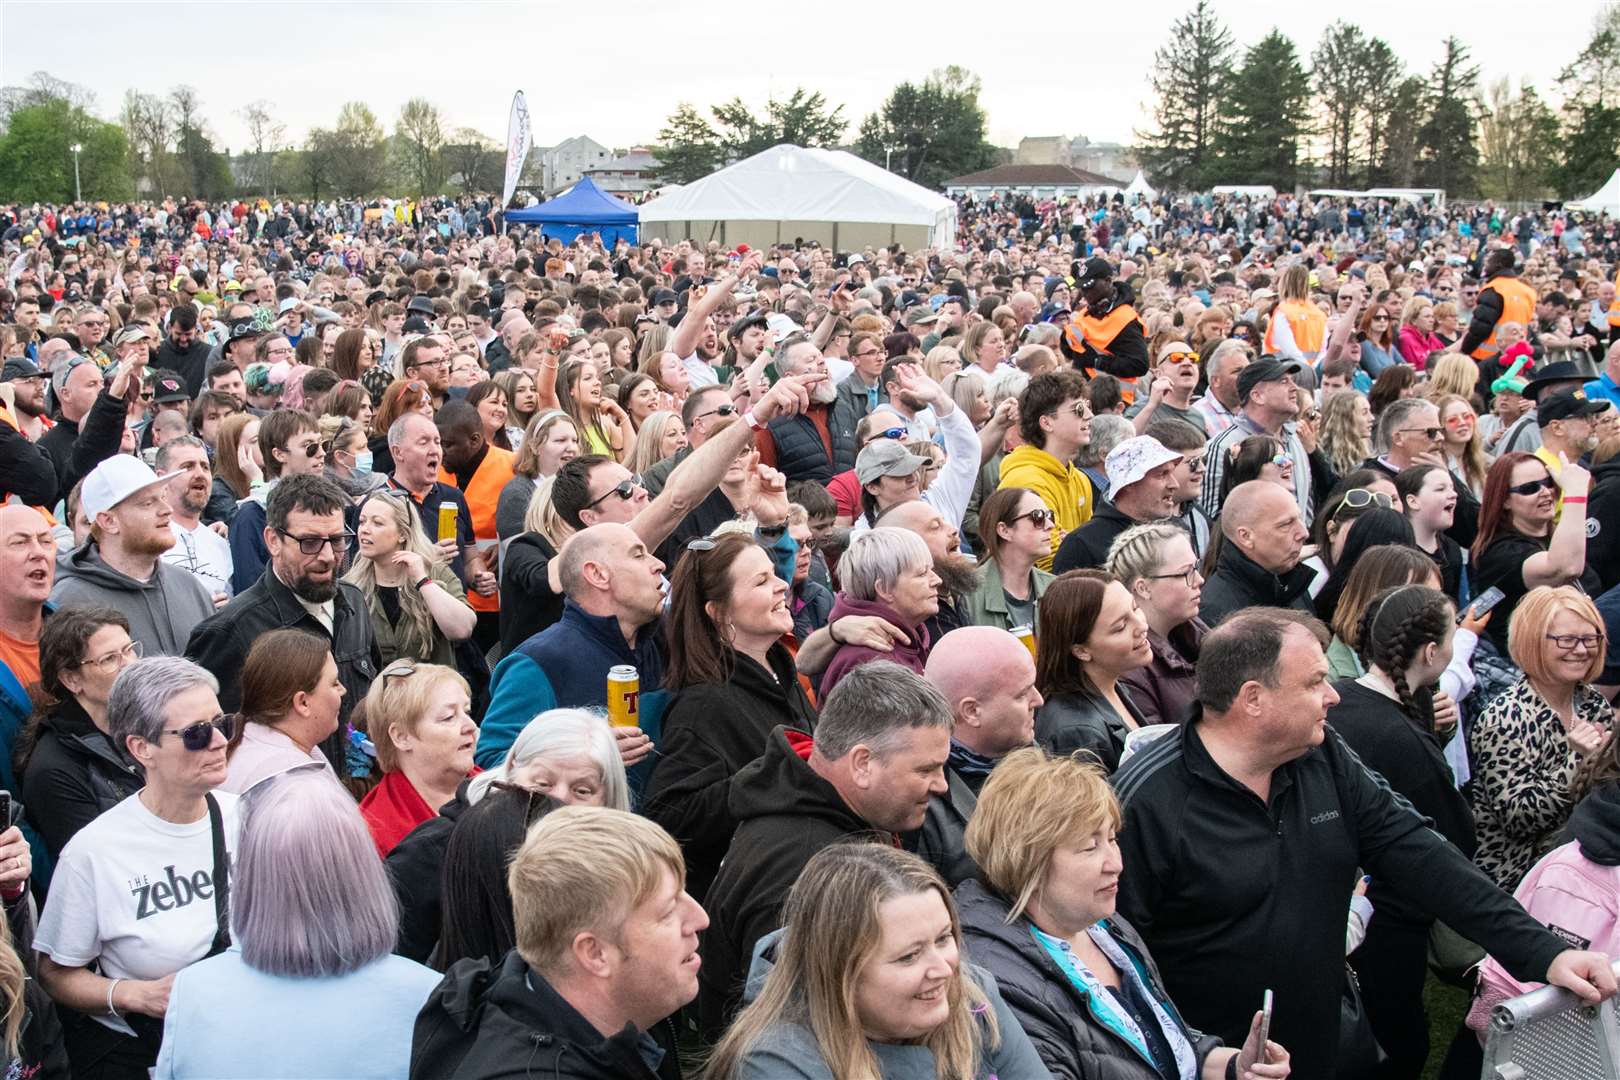 A capacity crowd enjoyed the show at Cooper Park in Elgin. Picture: Daniel Forsyth